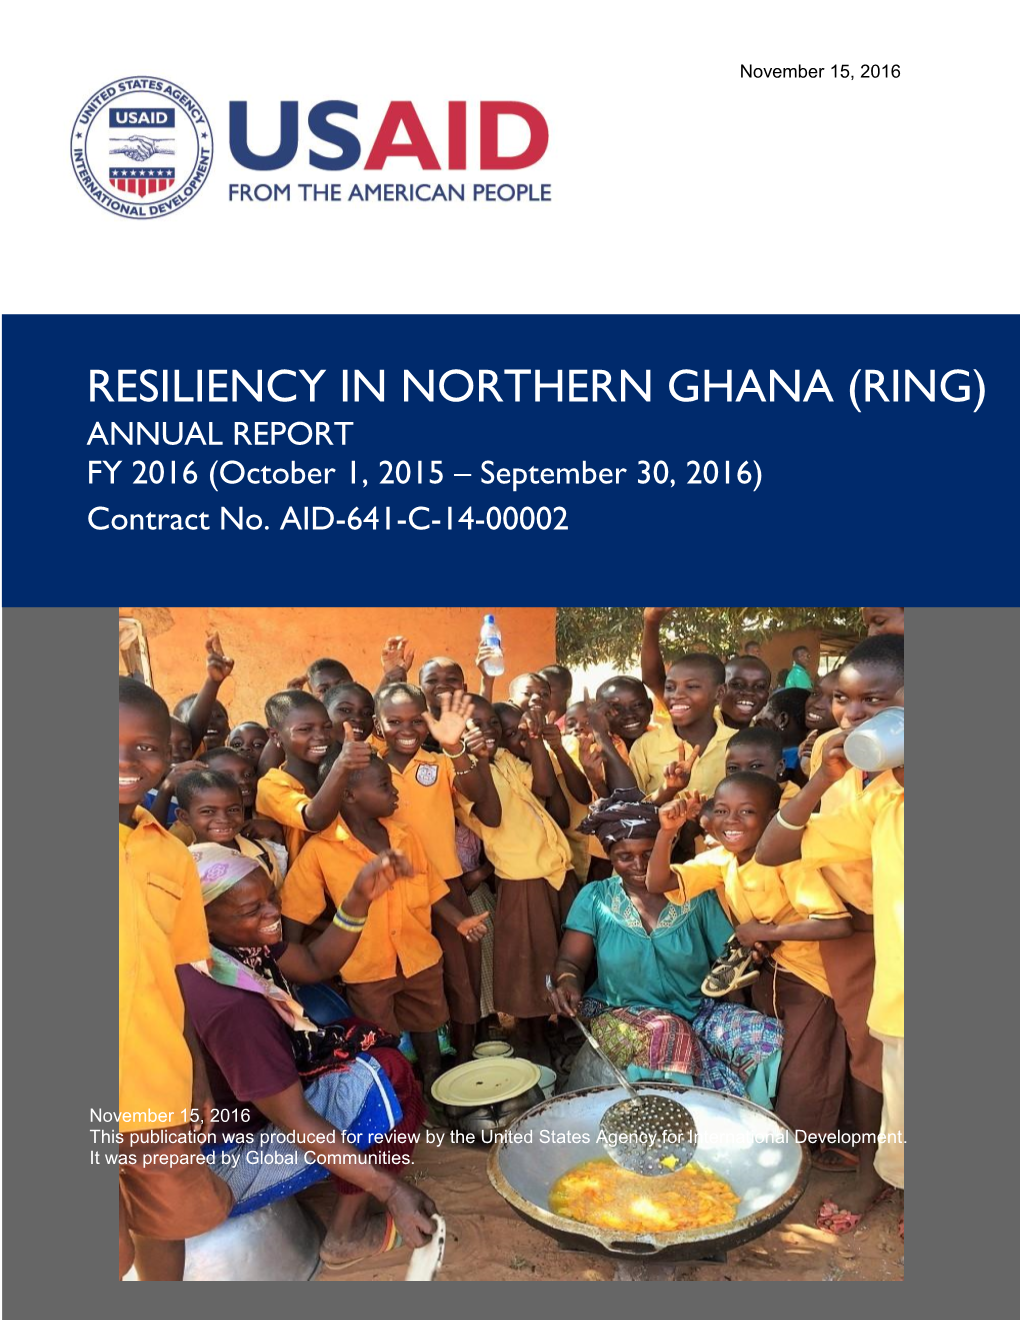 RESILIENCY in NORTHERN GHANA (RING) ANNUAL REPORT FY 2016 (October 1, 2015 – September 30, 2016) Contract No